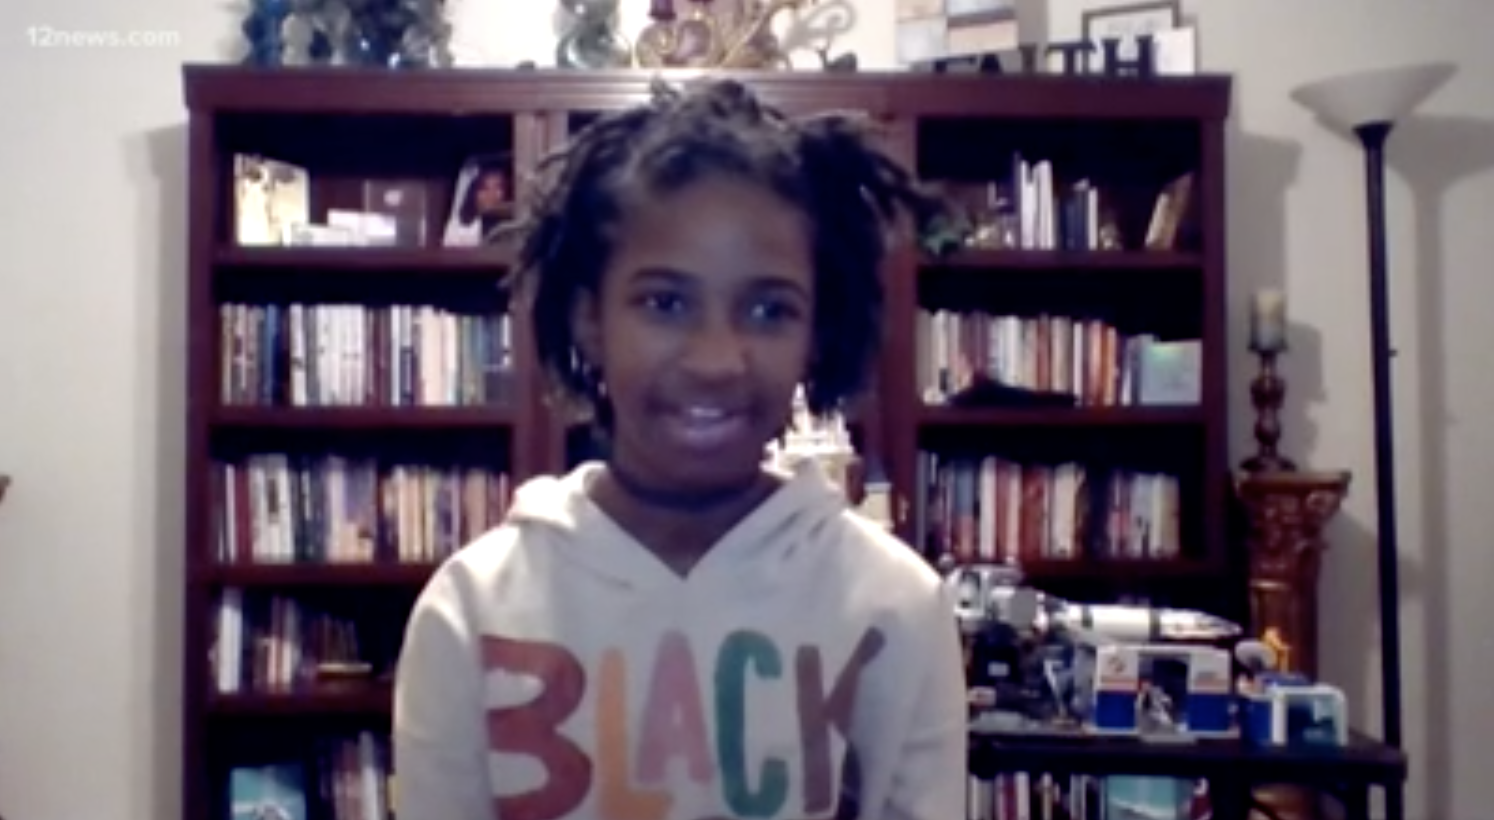 12-Year-Old Genius Alena Wicker Just Enrolled in College to Become a NASA Scientist